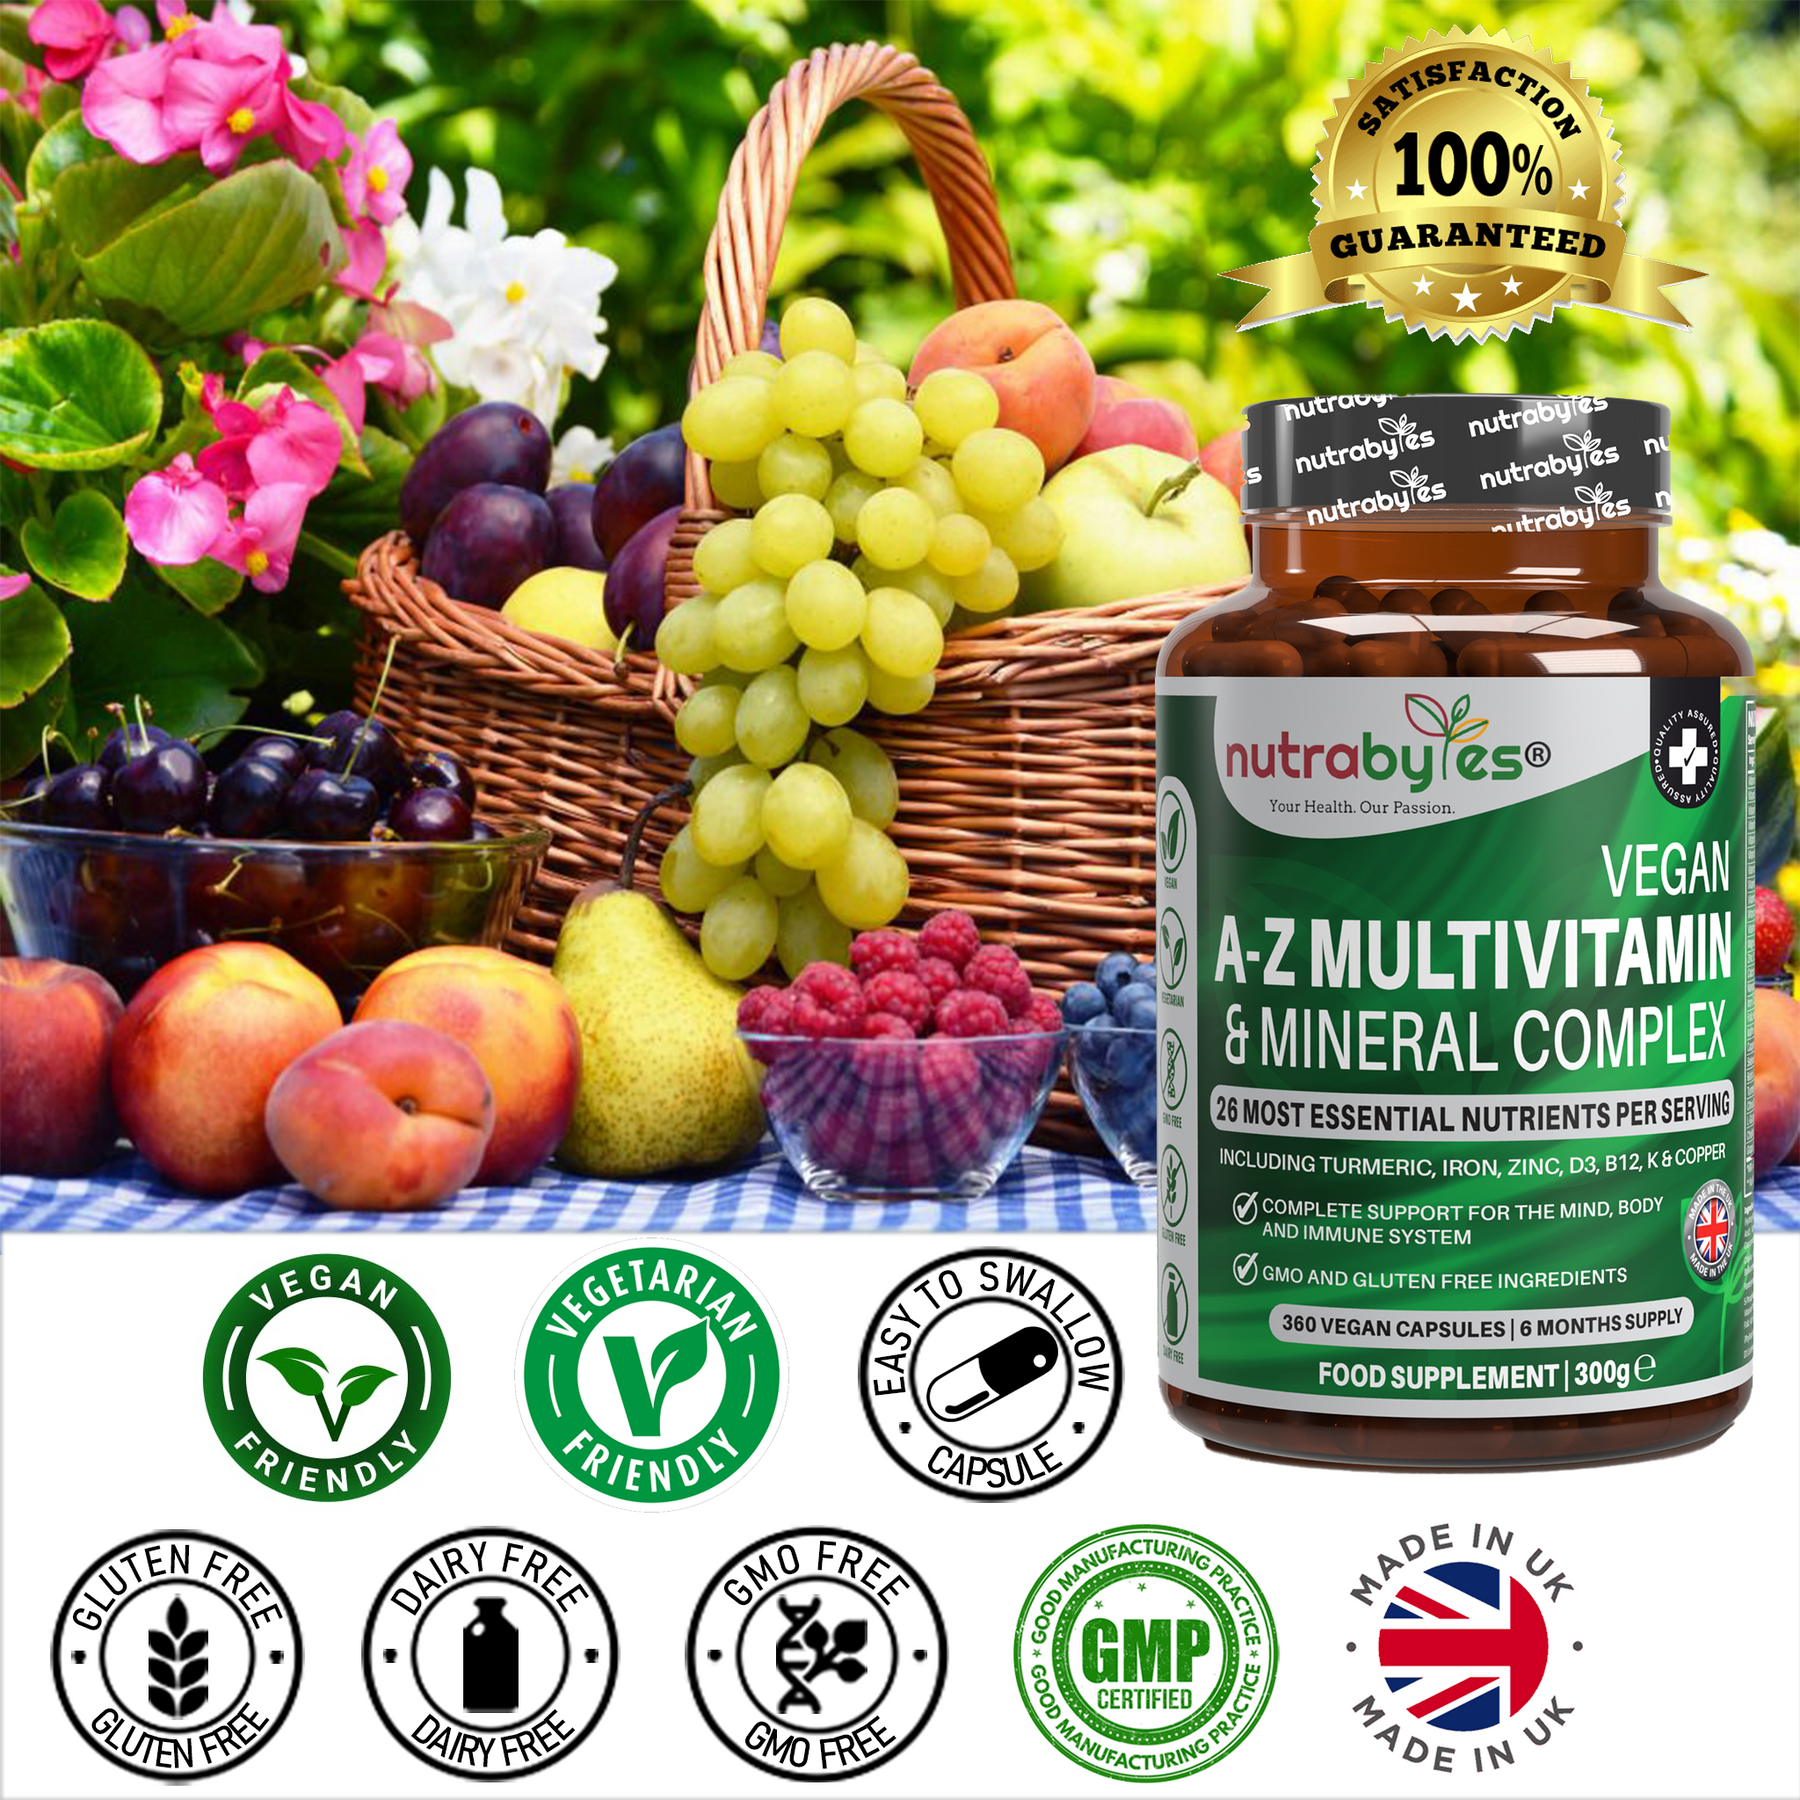 Vegan A-Z Multivitamin & Mineral Complex (26 Essential Nutrients), 360 Capsules (6 months) | Healthy Mind, Body and Immune System | Made in the UK